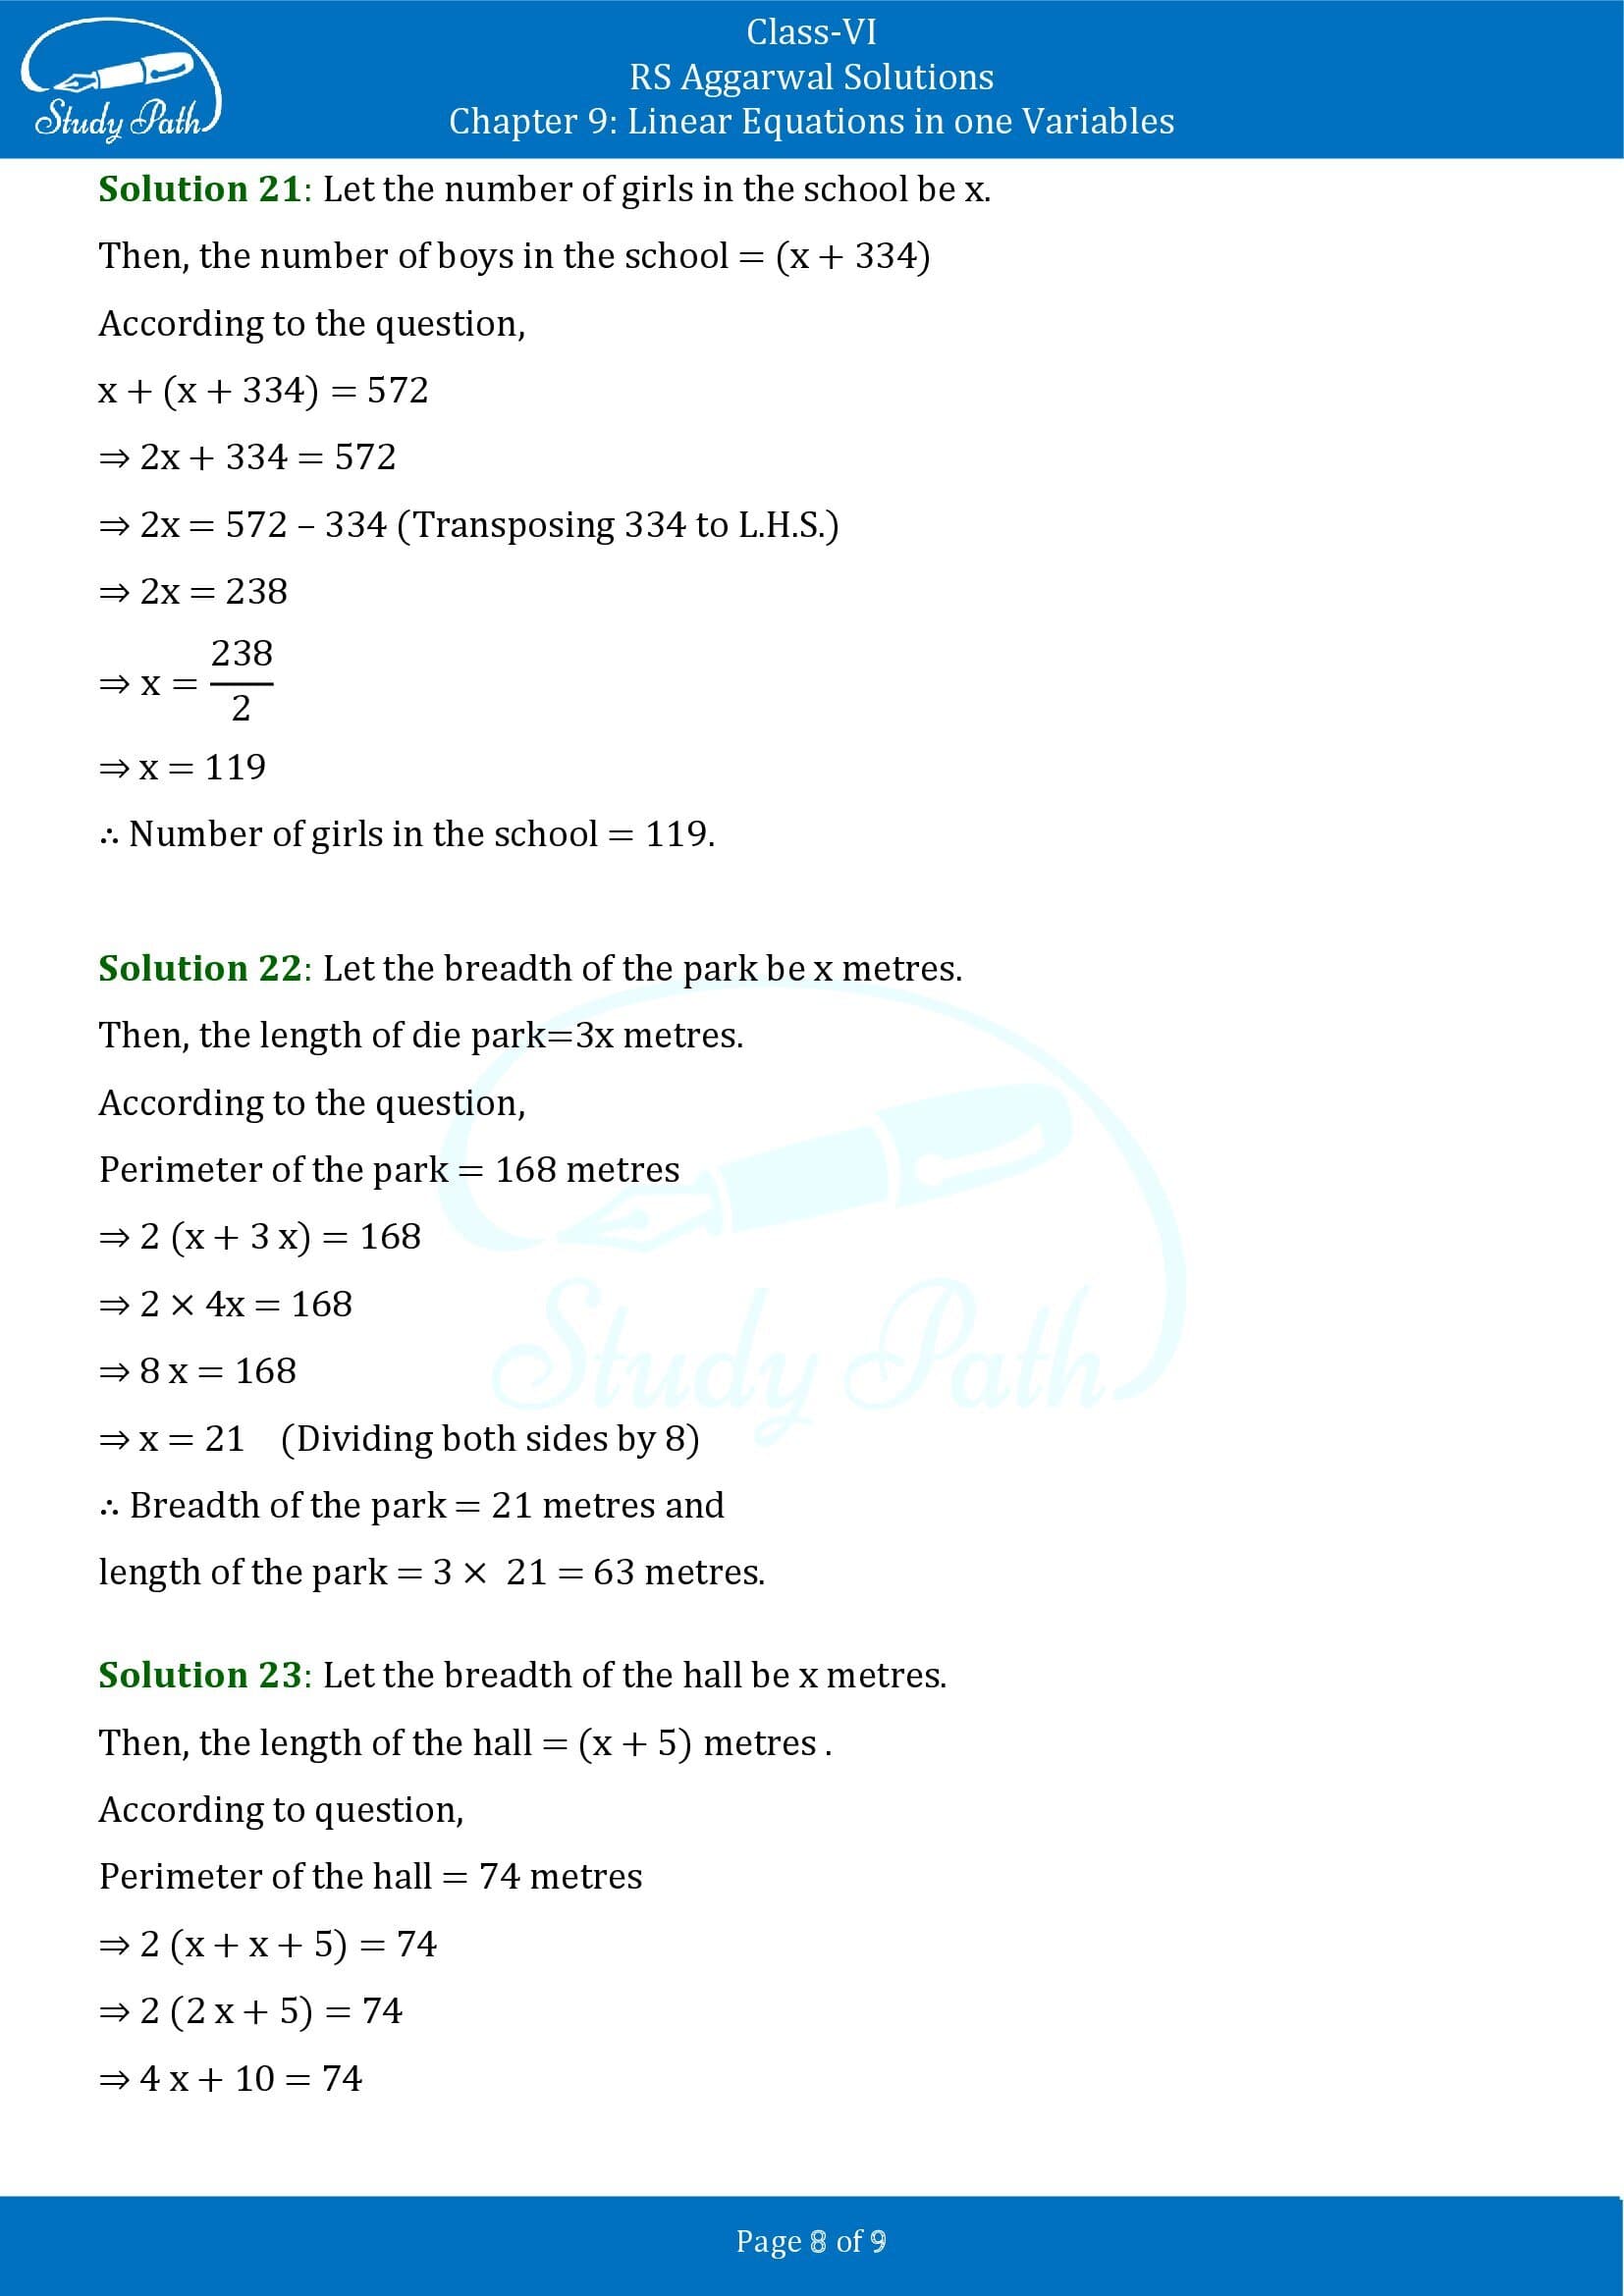 RS Aggarwal Solutions Class 6 Chapter 9 Linear Equations in One Variable Exercise 9C 00008